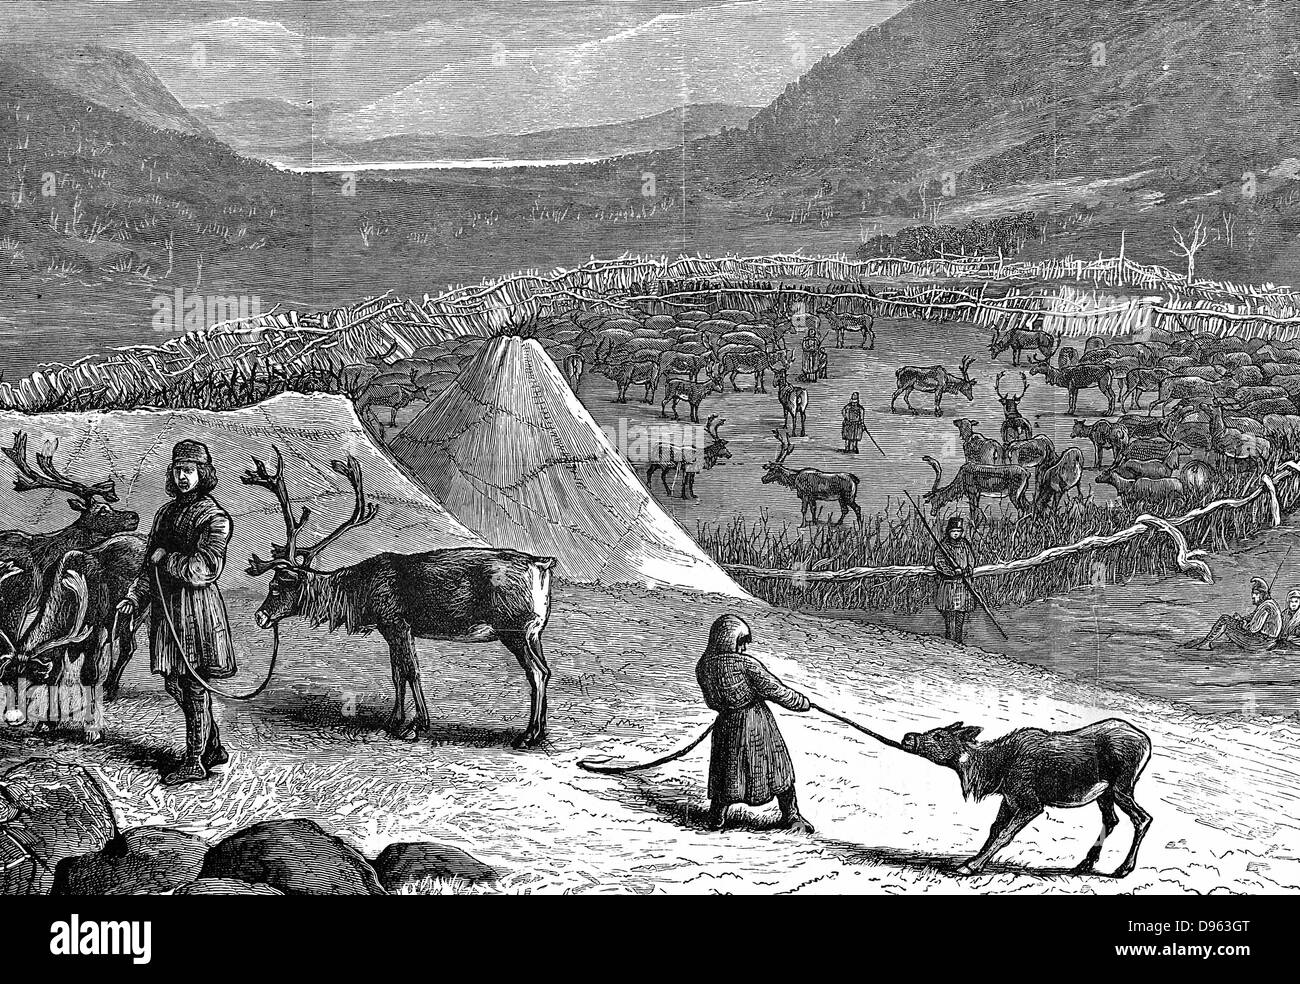 Lapps encampment with reindeer corral. Nomadic herdsmen of Arctic regions whose reindeer provided food, clothing, tools and transport,  Wood engraving, 1882. Stock Photo